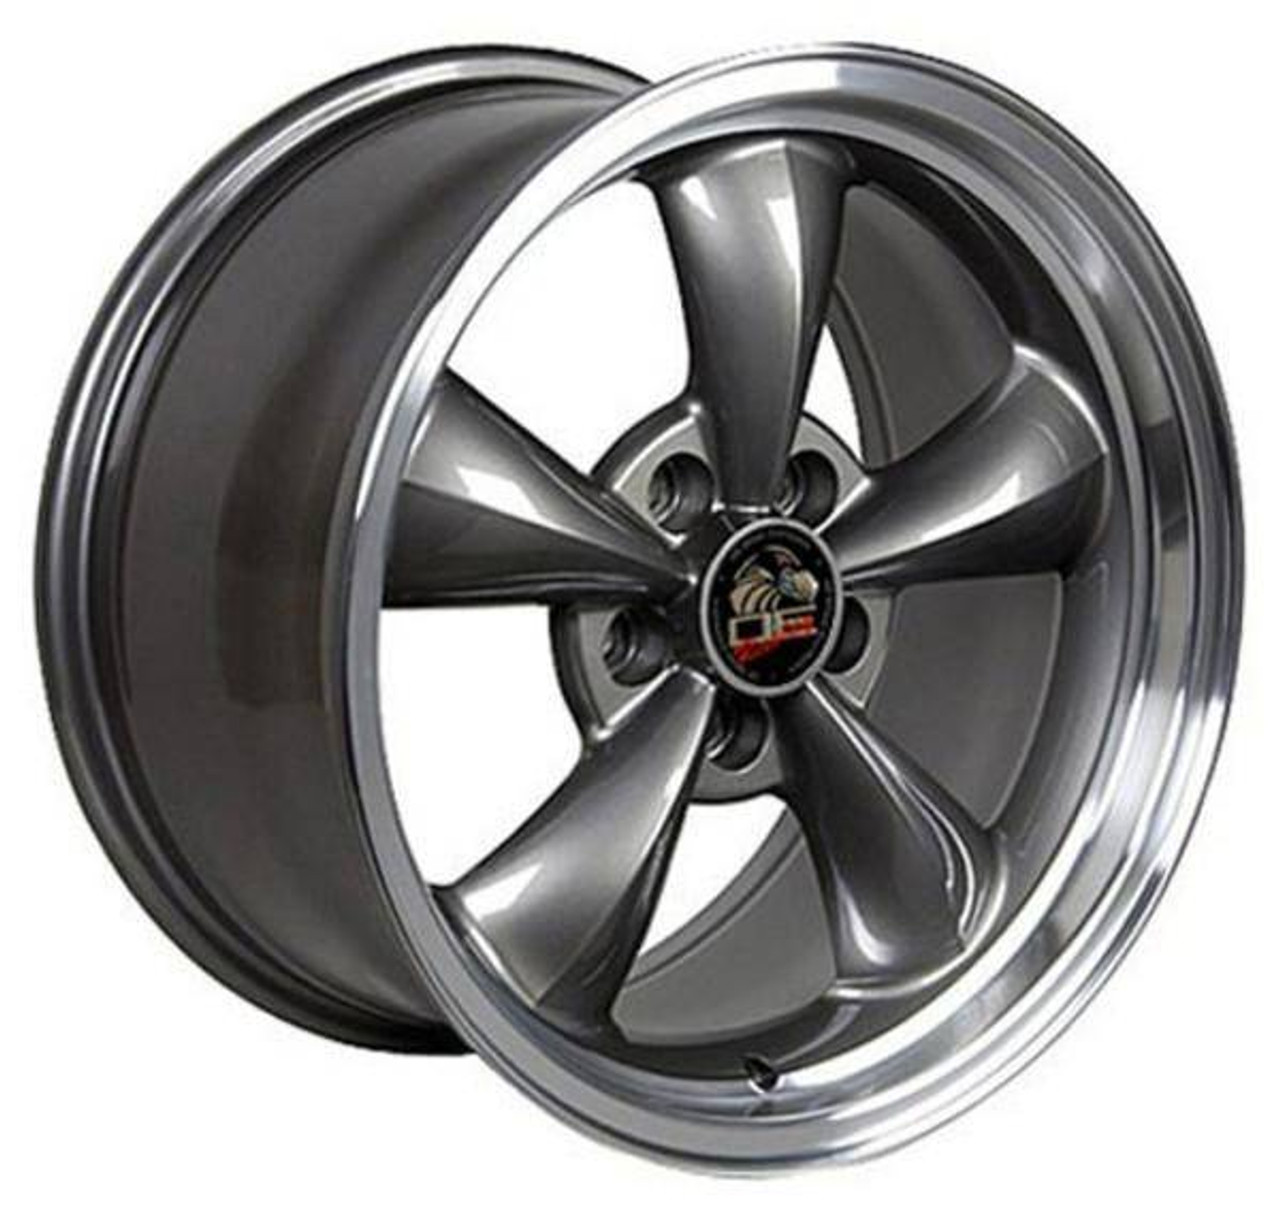 17" Wheel replacement for Mustang replica 8181821